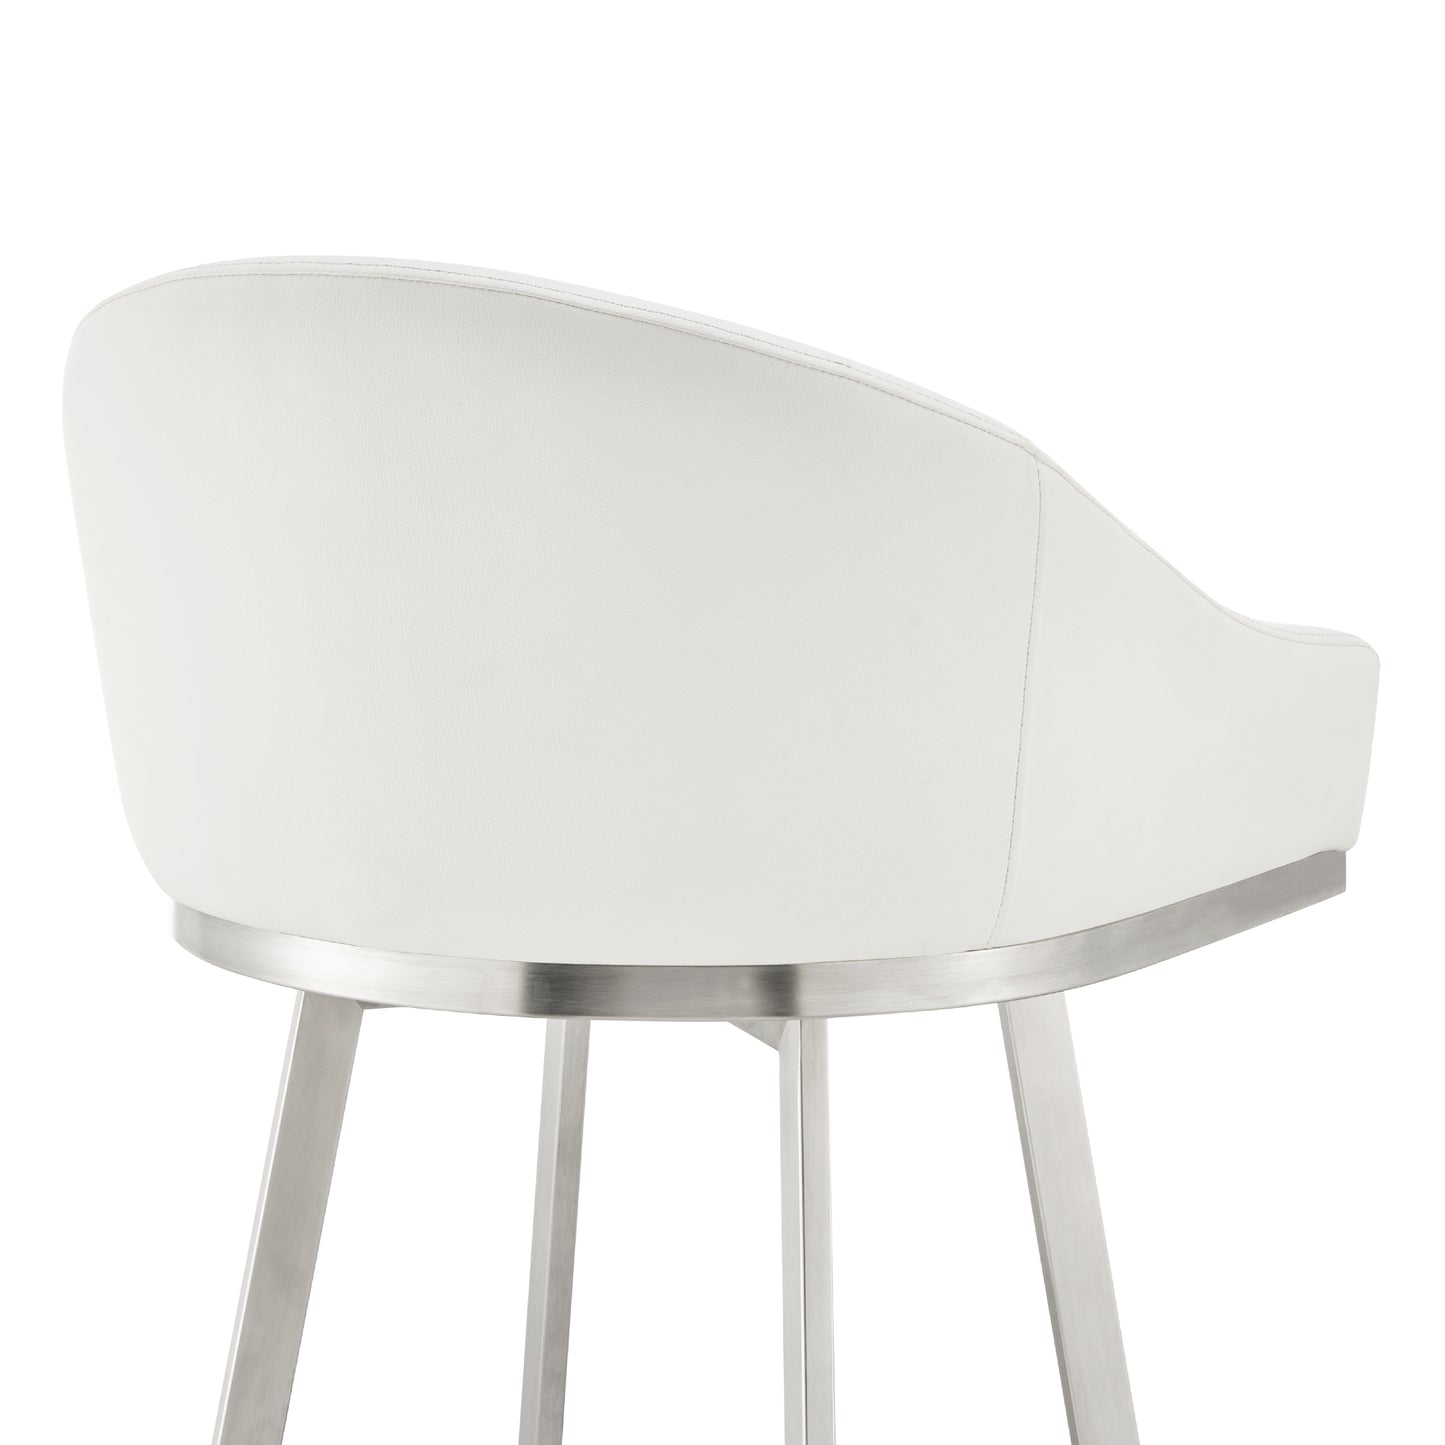 Eleanor 26" Swivel Counter Stool in Brushed Stainless Steel with White Faux Leather